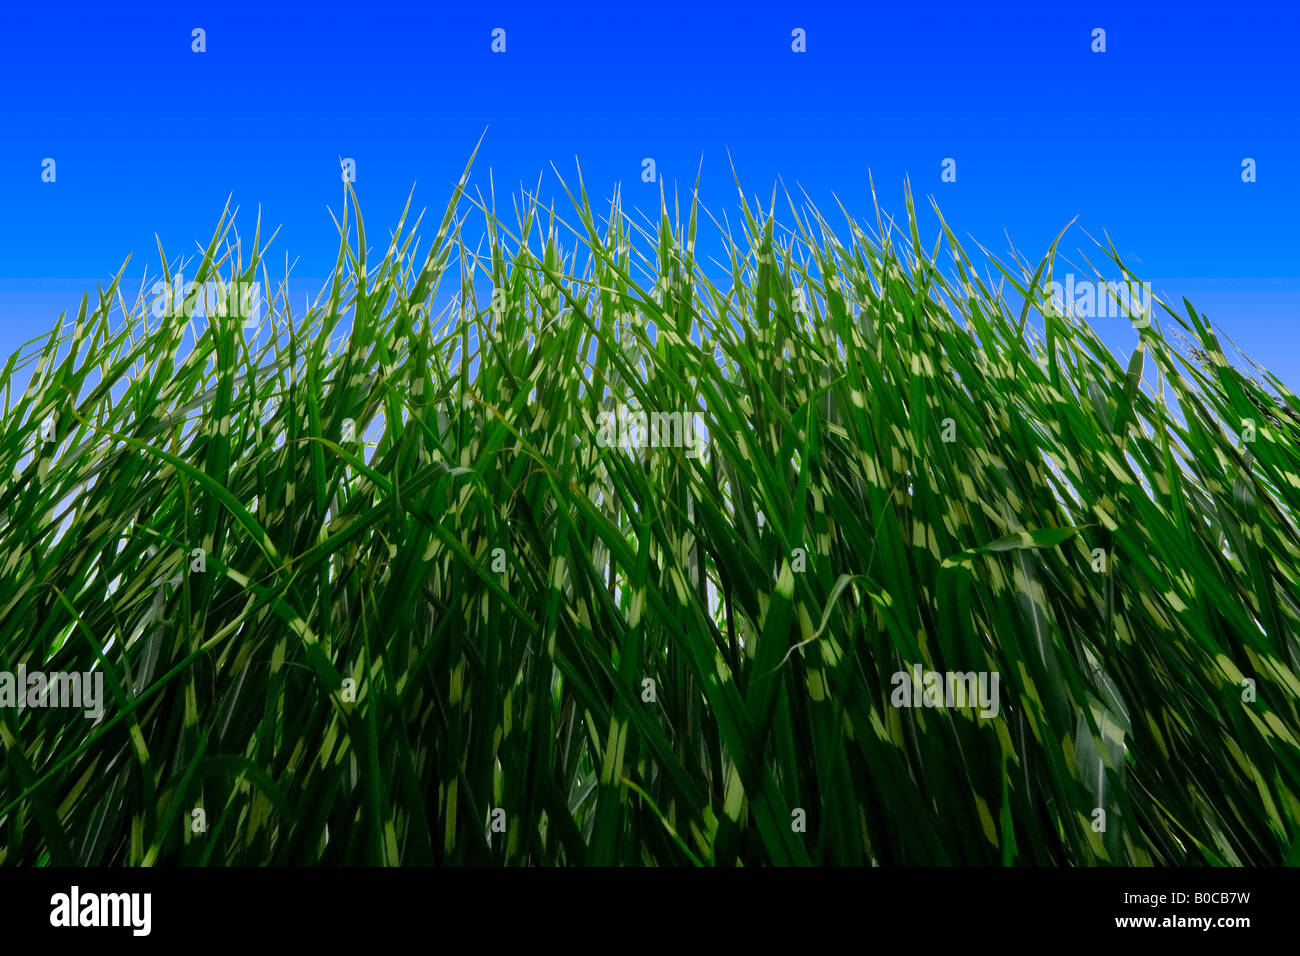 Image of green and yellow Zebra Grasses set against a bright blue sky background Silhouette cutout Stock Photo